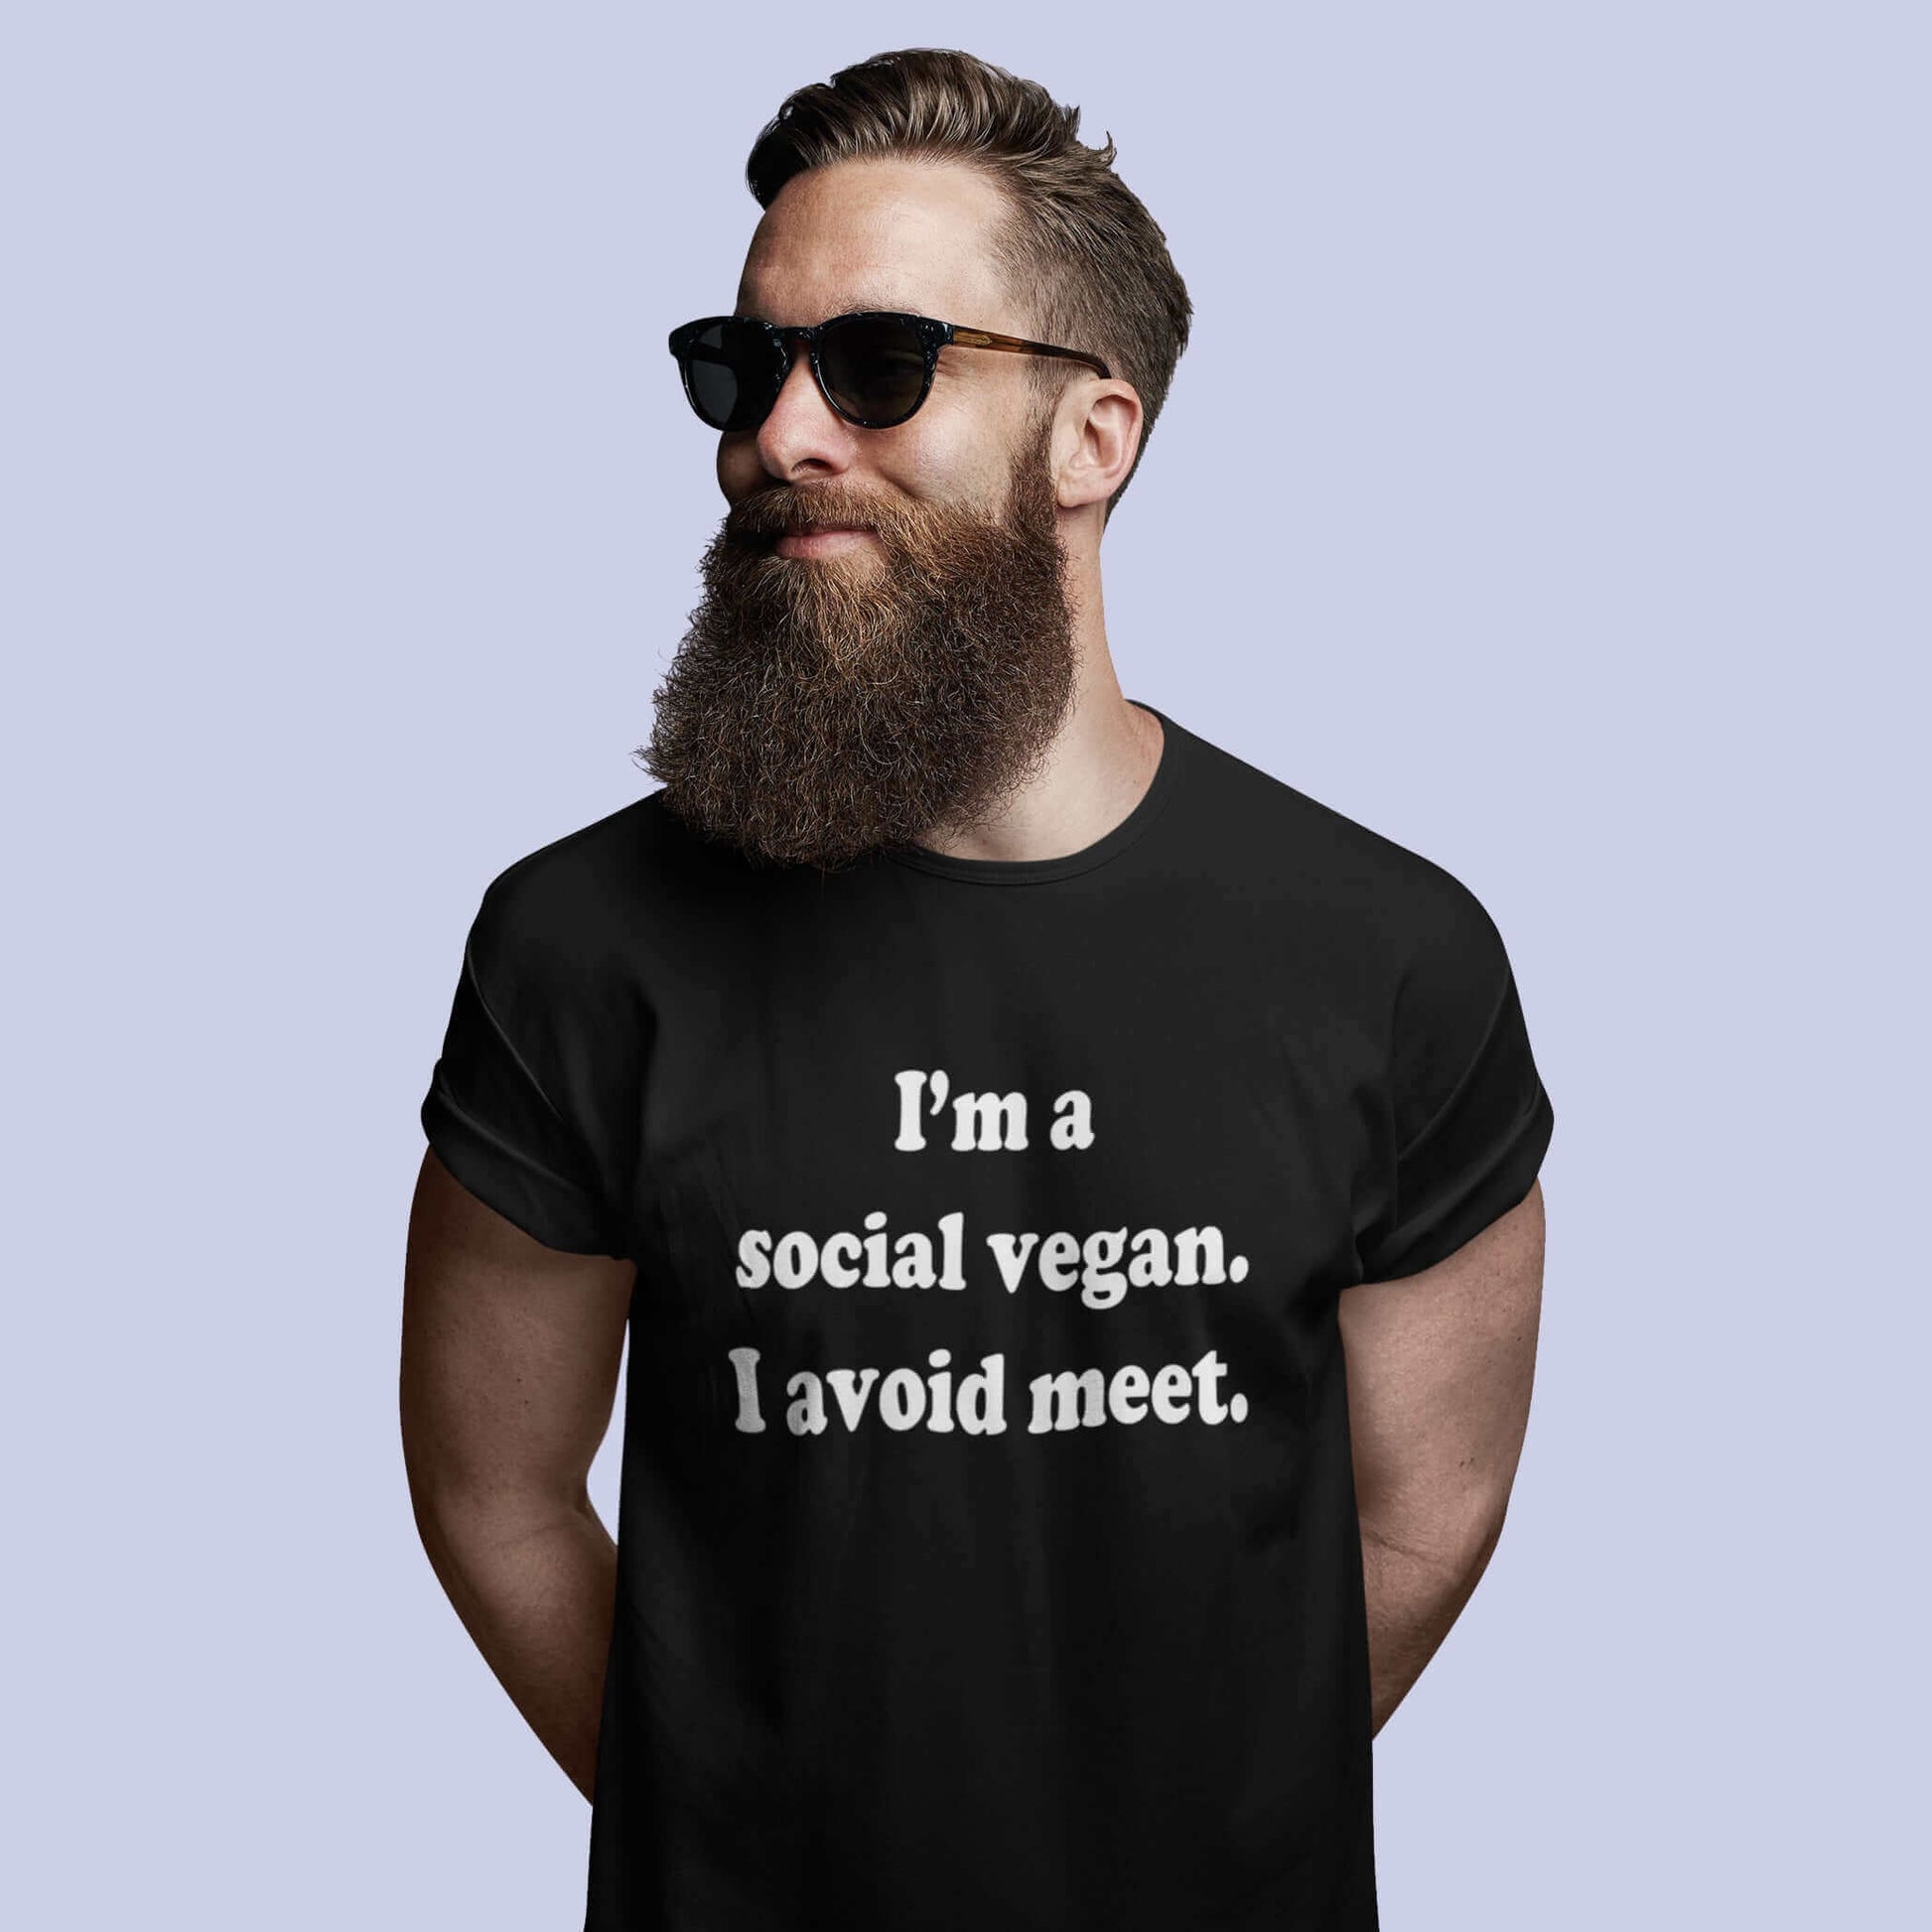 Bearded man wearing sunglasses and a black t-shirt with the pun phrase I'm a social vegan, I avoid meet printed on the front.